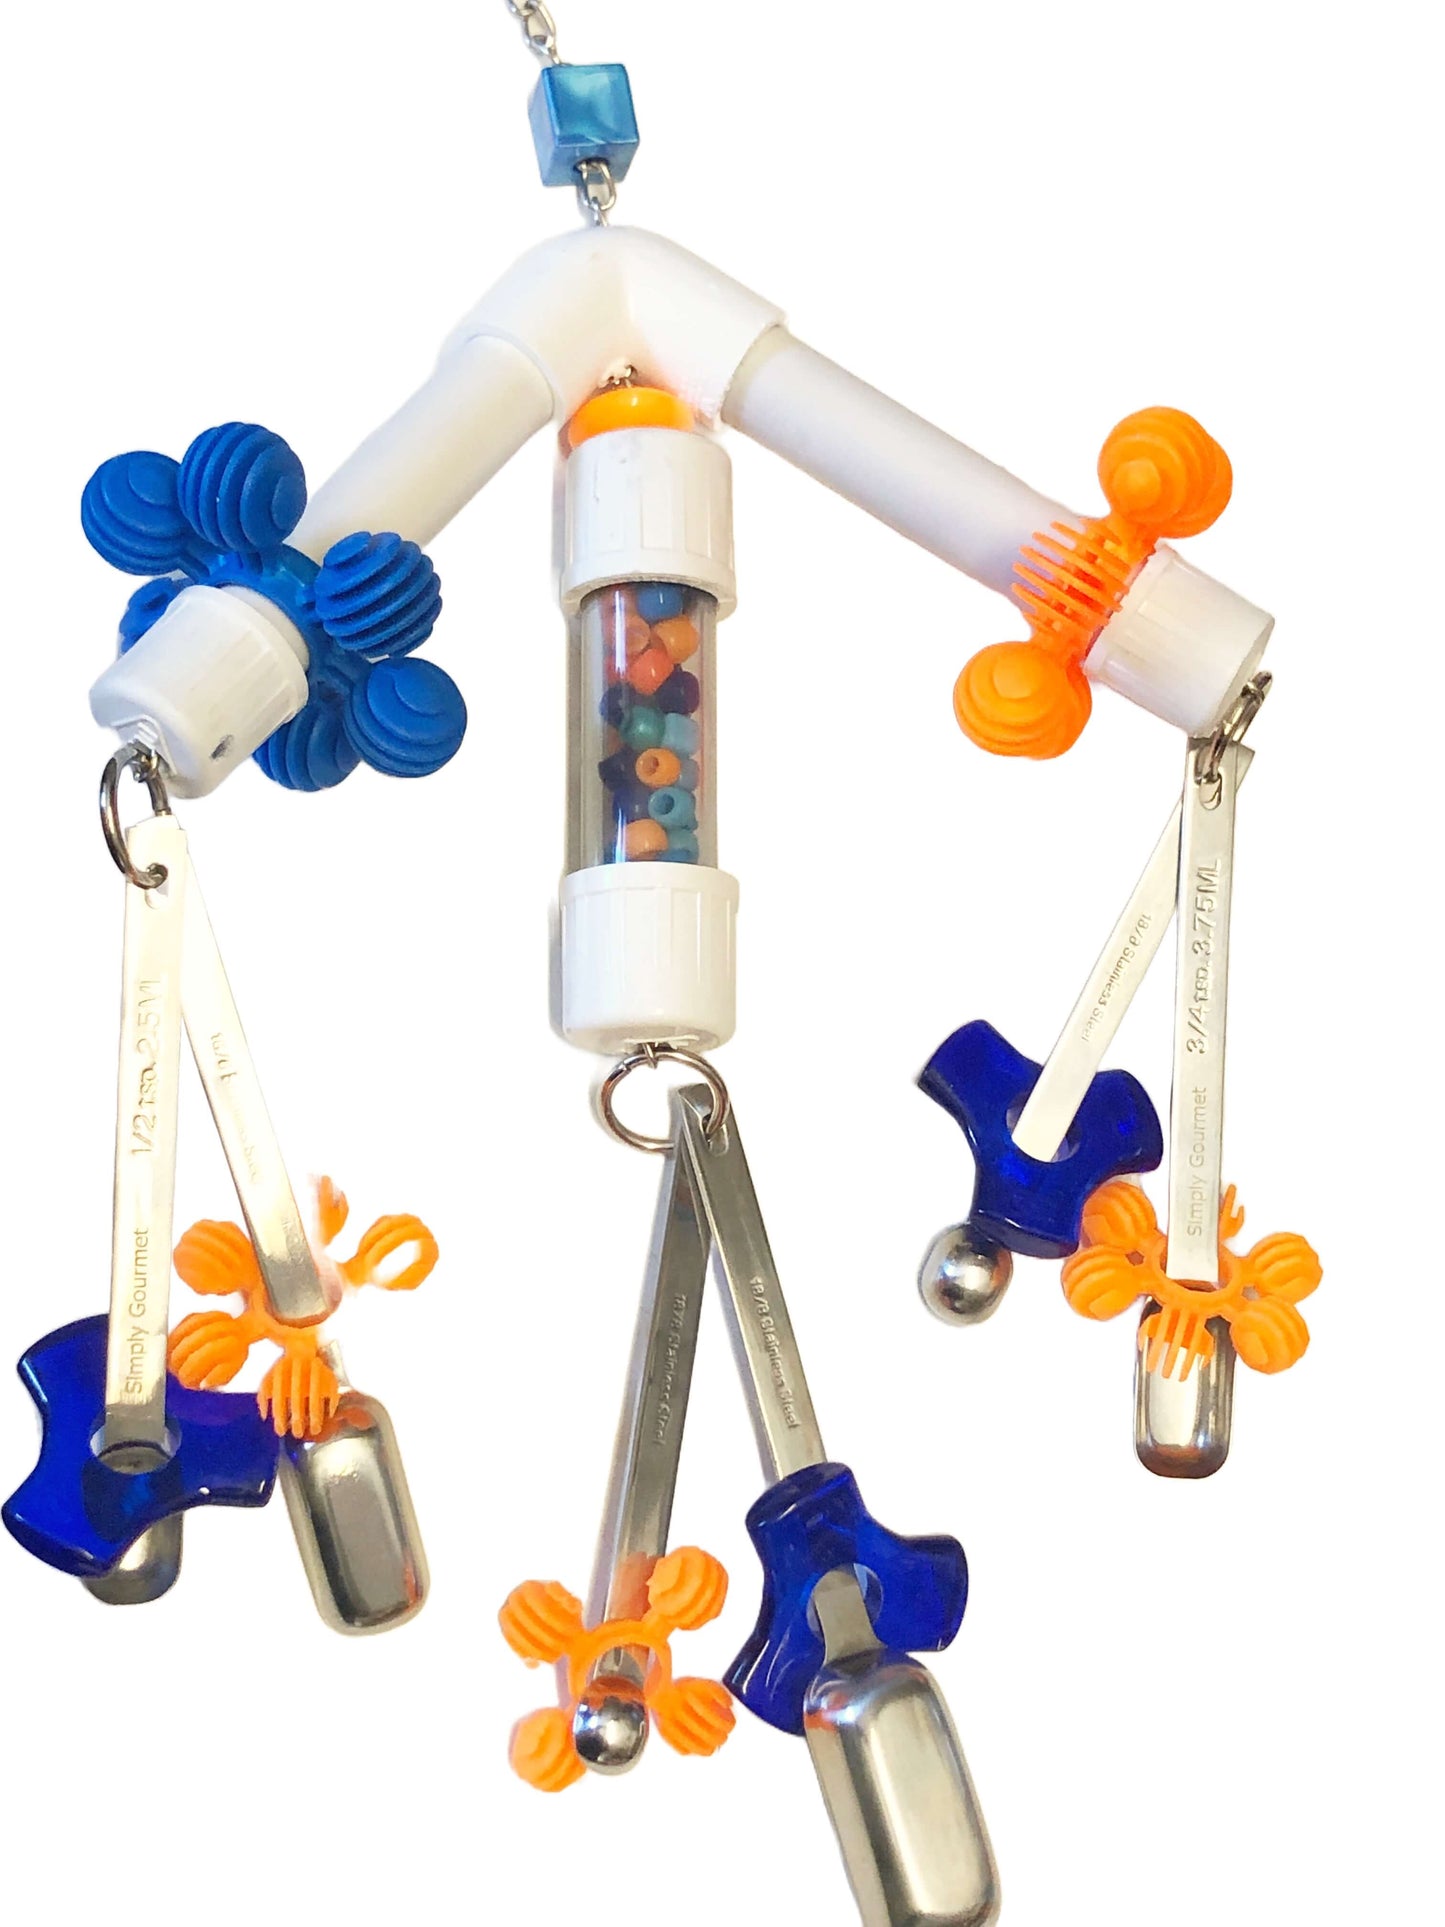 pvc bird bird toy with blue and orange charms, beads